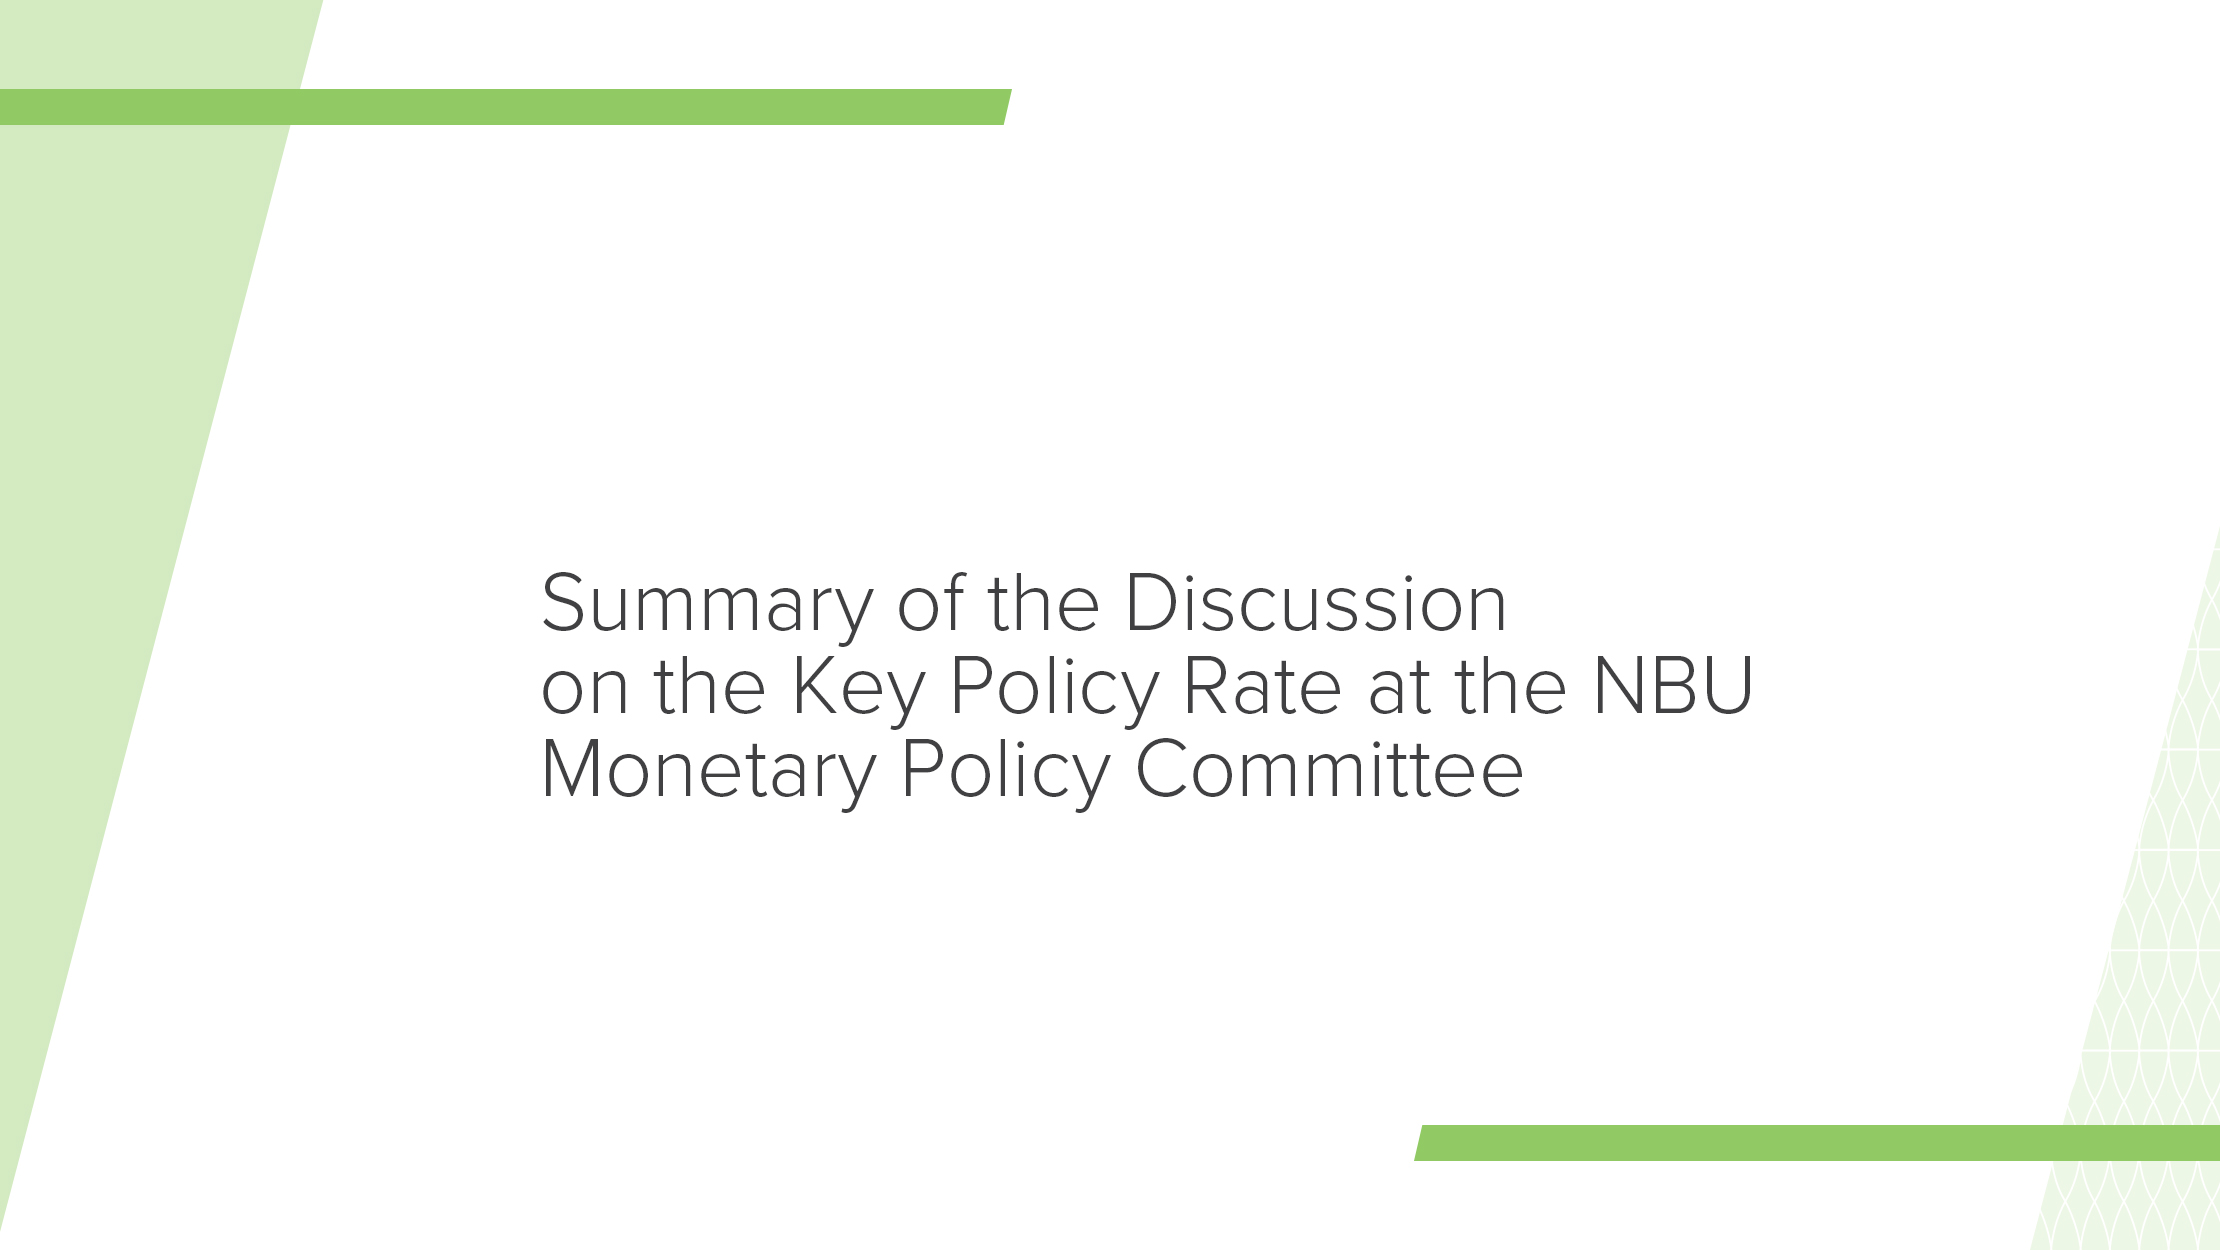 Summary of the Key Policy Rate Discussion by the NBU Monetary Policy Committee 4 September 2019